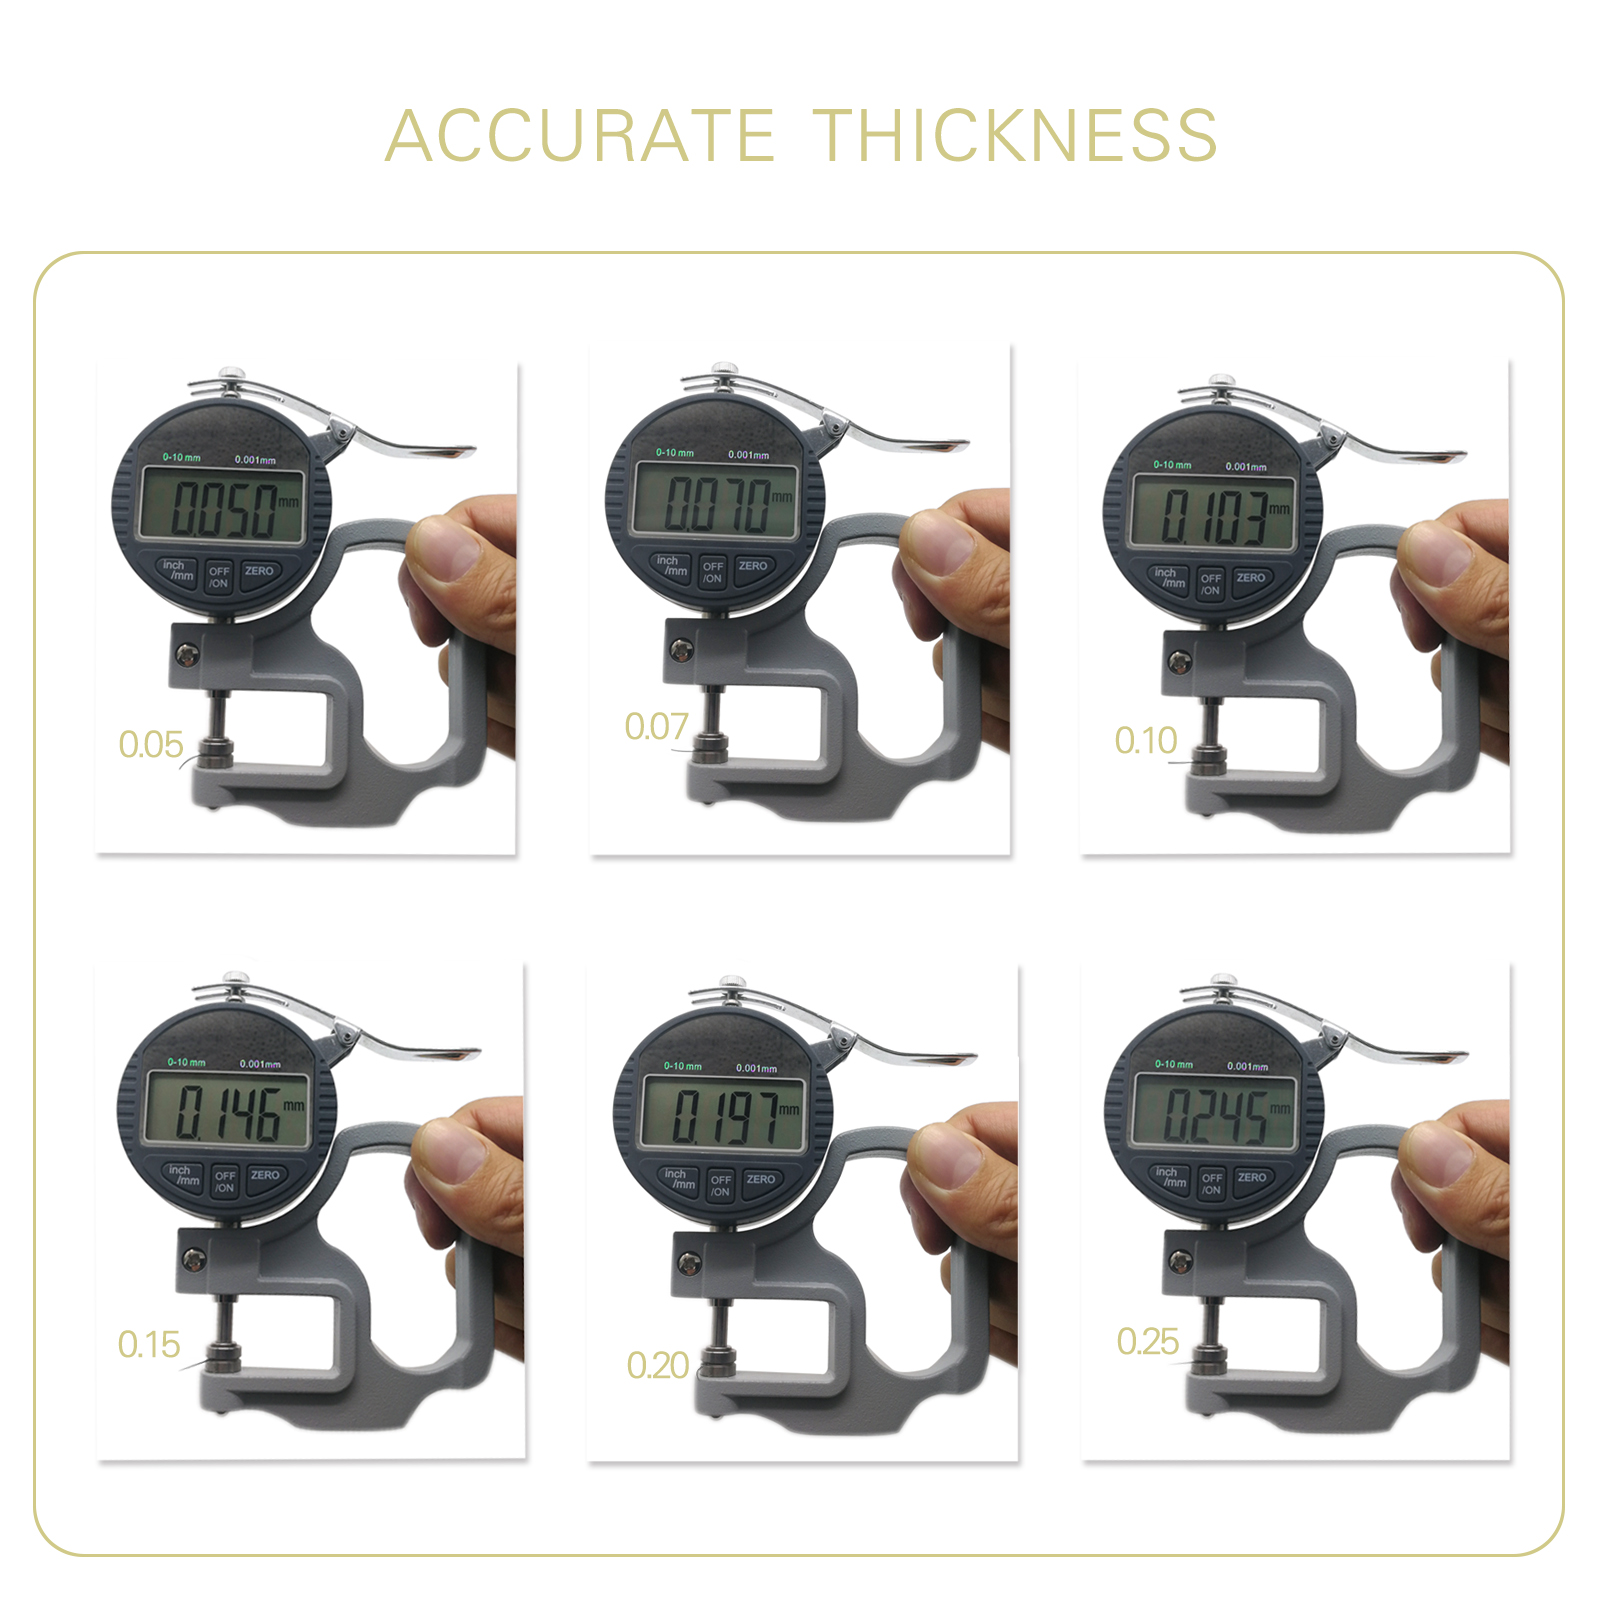 6.Accurate thickness拼图.jpg